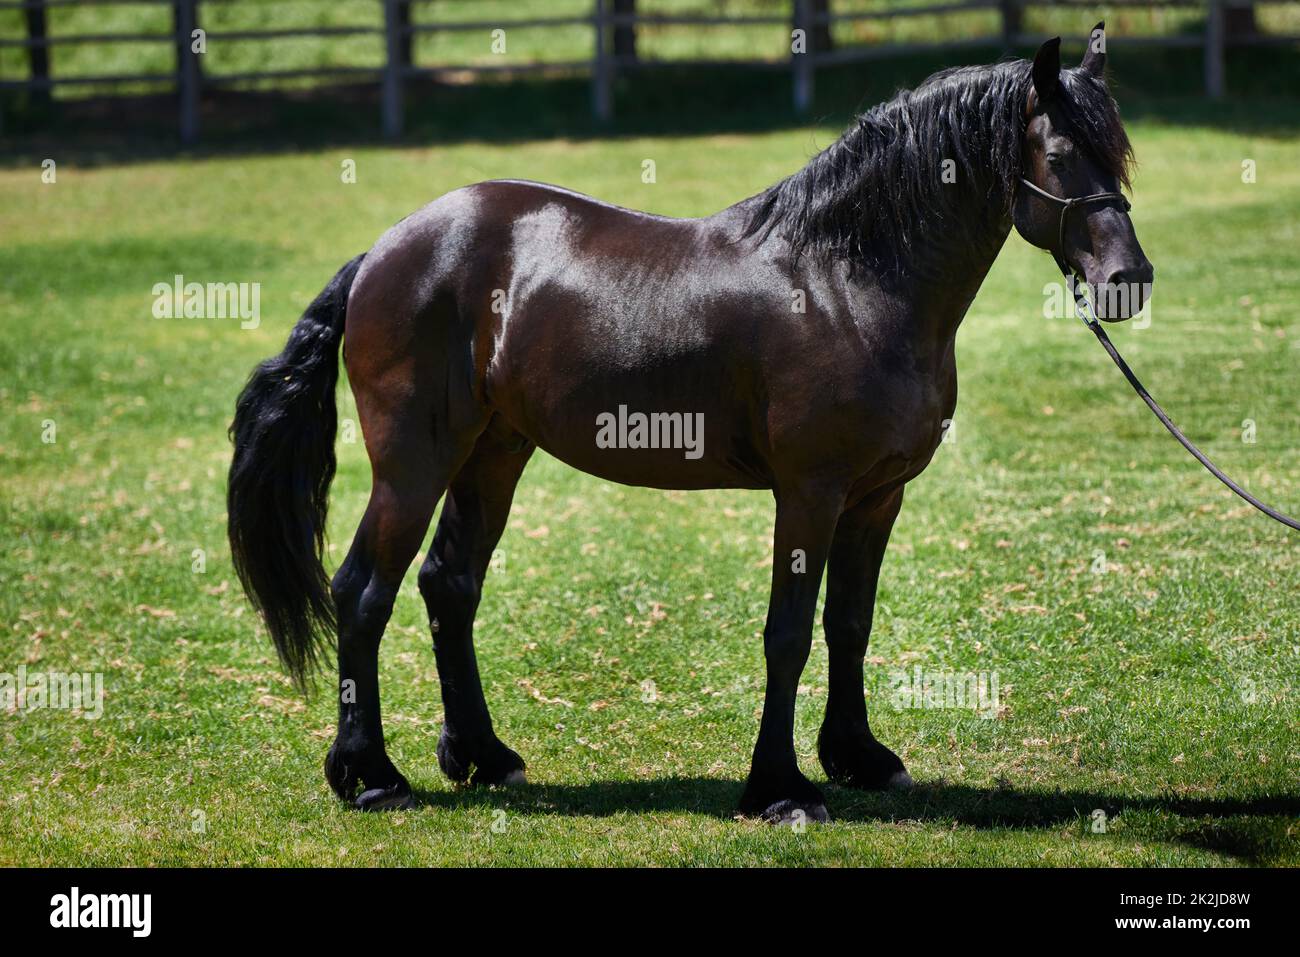 The best place for thoroughbred horses. Shot of a dark bay horse in a head collar standing in a field. Stock Photo